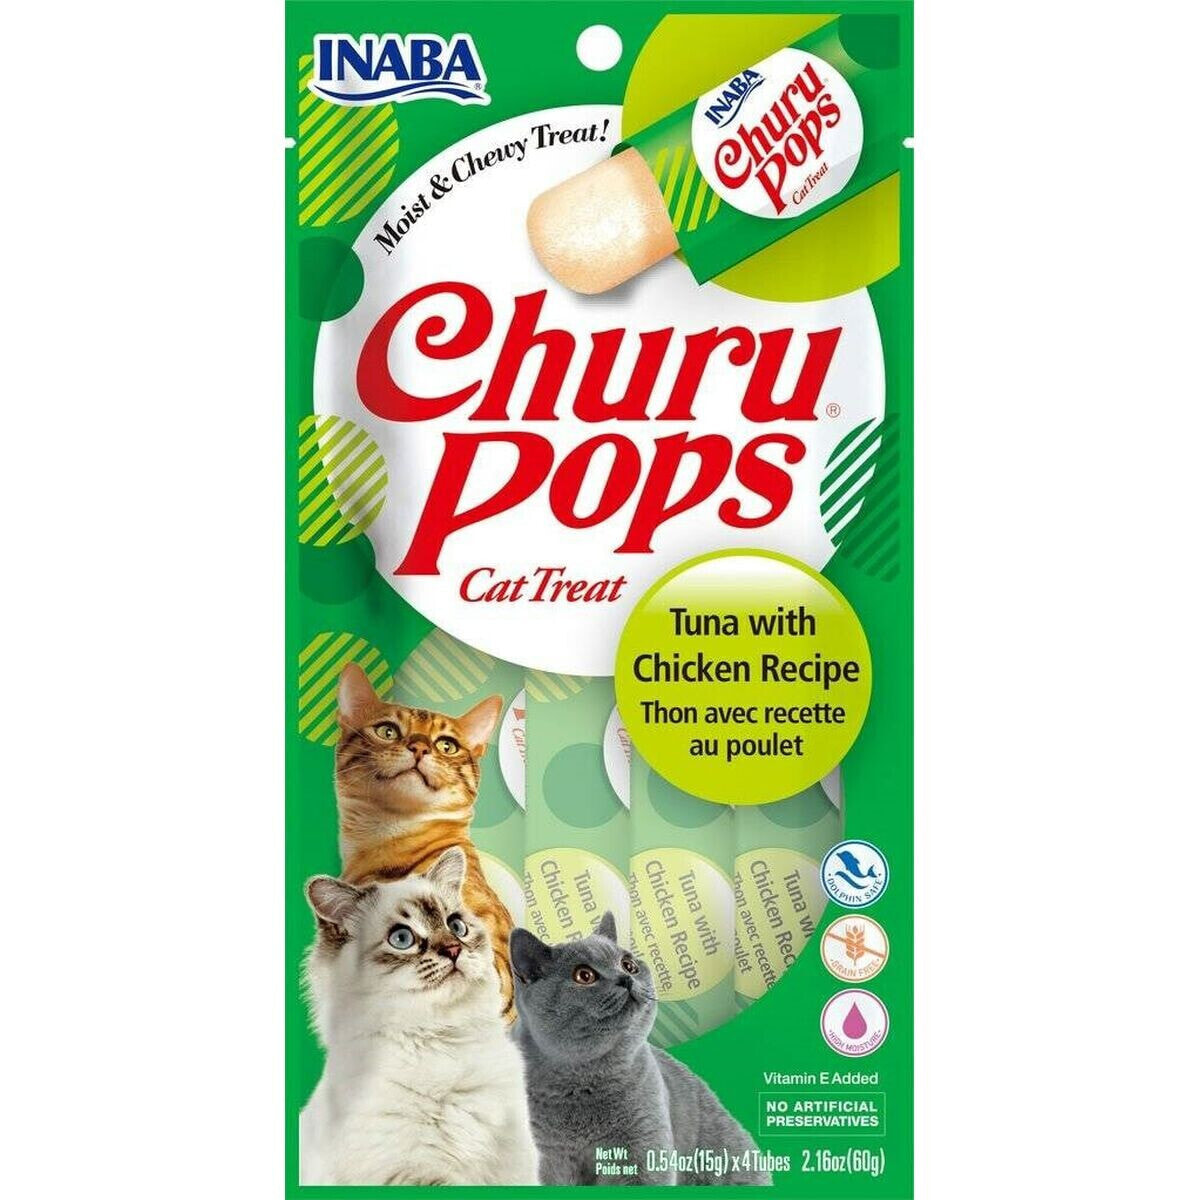 Snack for Cats Inaba EU713 4 x 15 g Sweets Chicken Tuna 15 ml